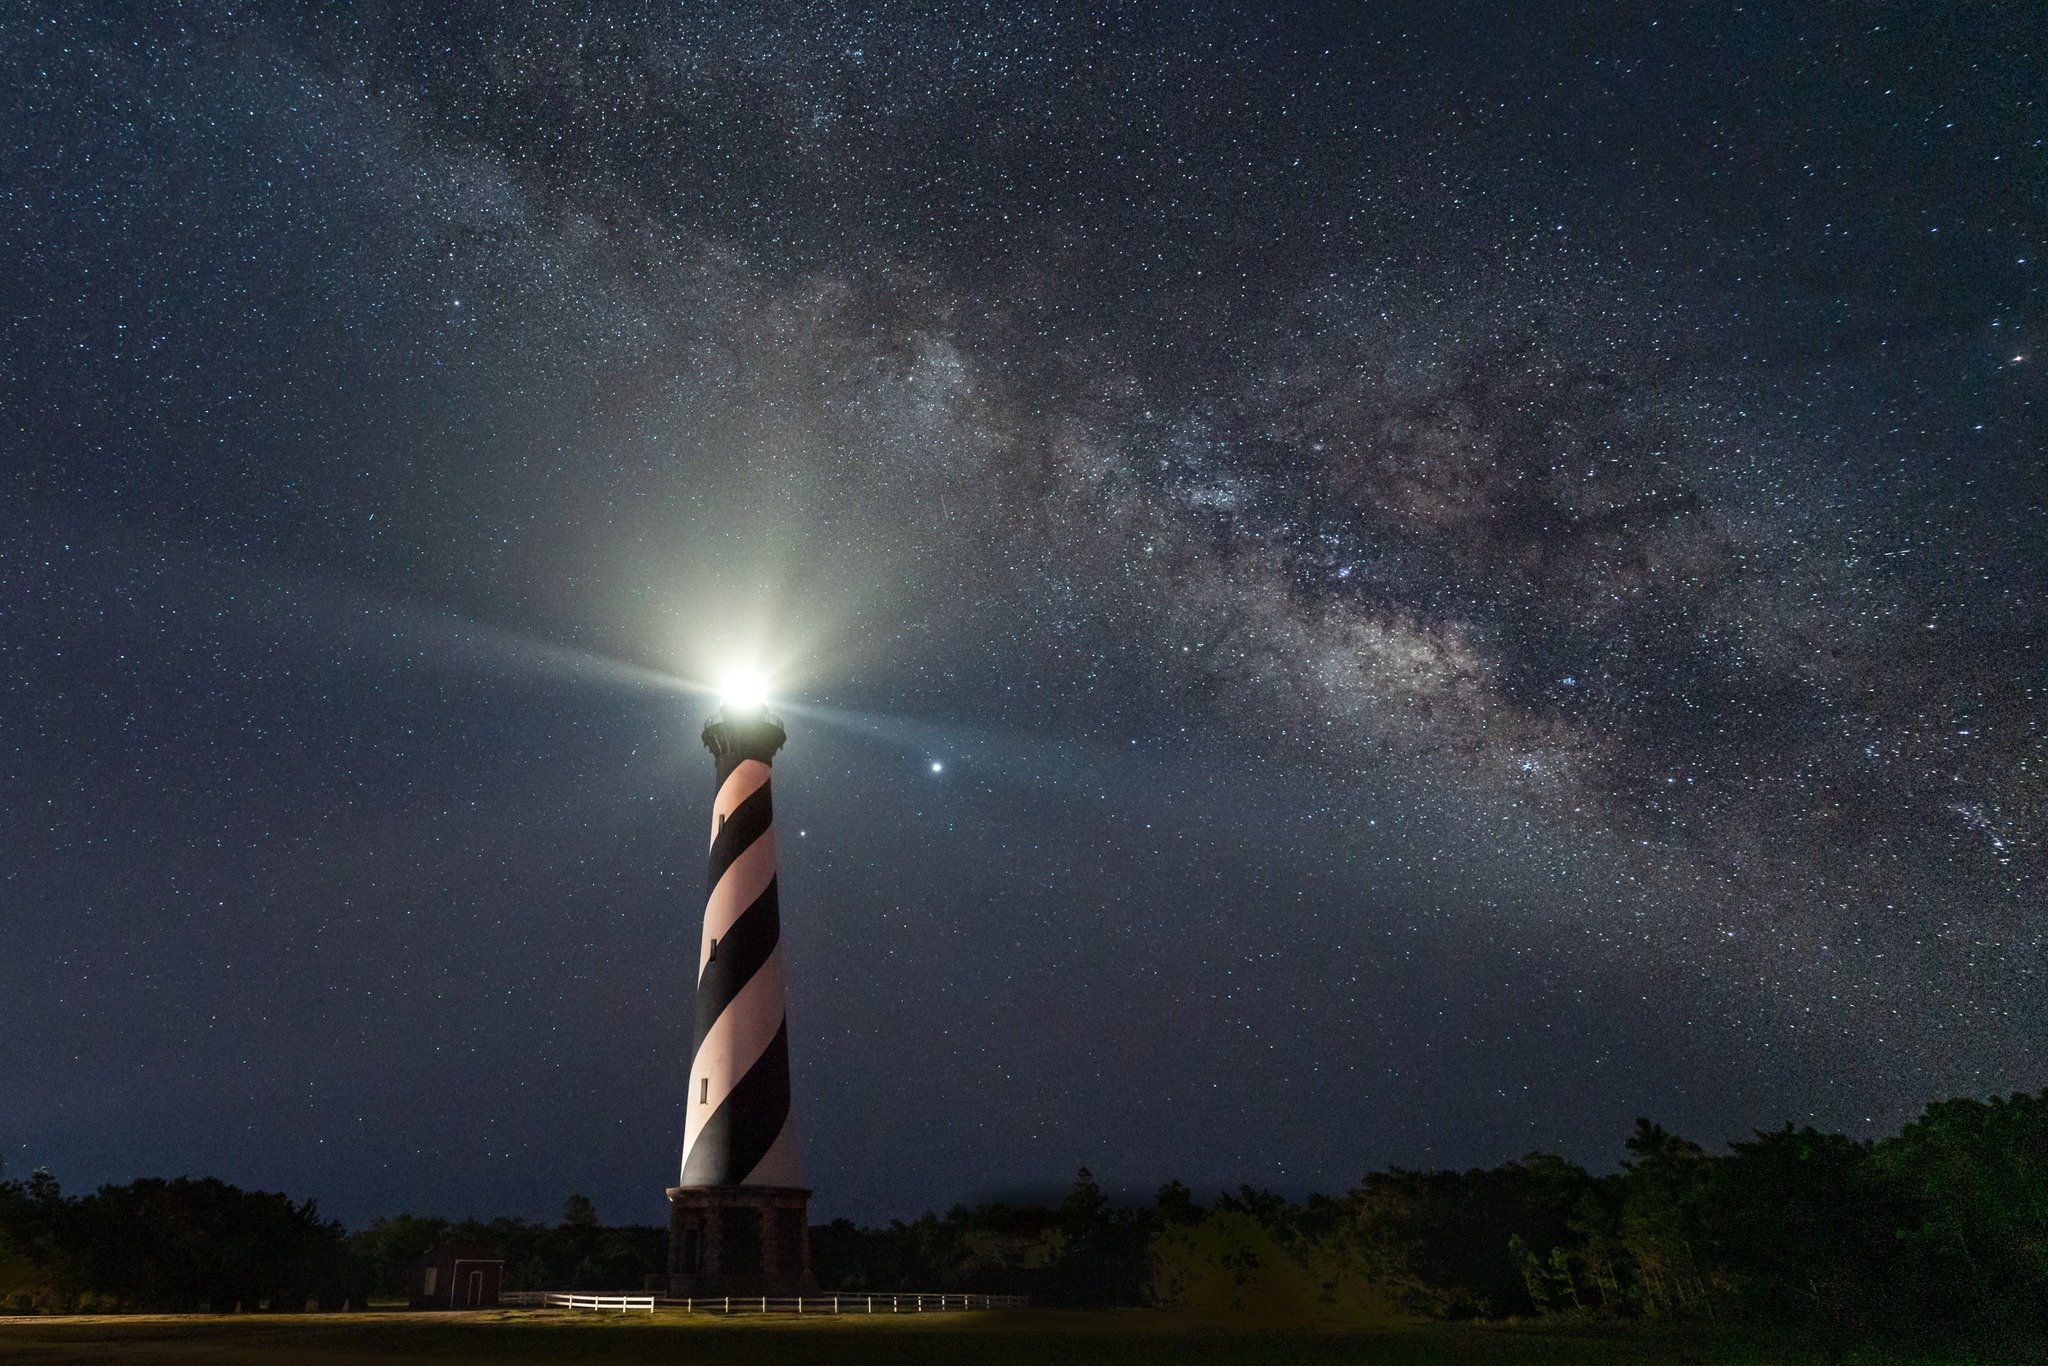 Happy #NationalParkWeek!  Did you know that Cape Hatteras National Seashore is America's first National Seashore?  The designation &quot;national seashore&quot; focuses on the preservation of shoreline areas while also allowing water-based recreation